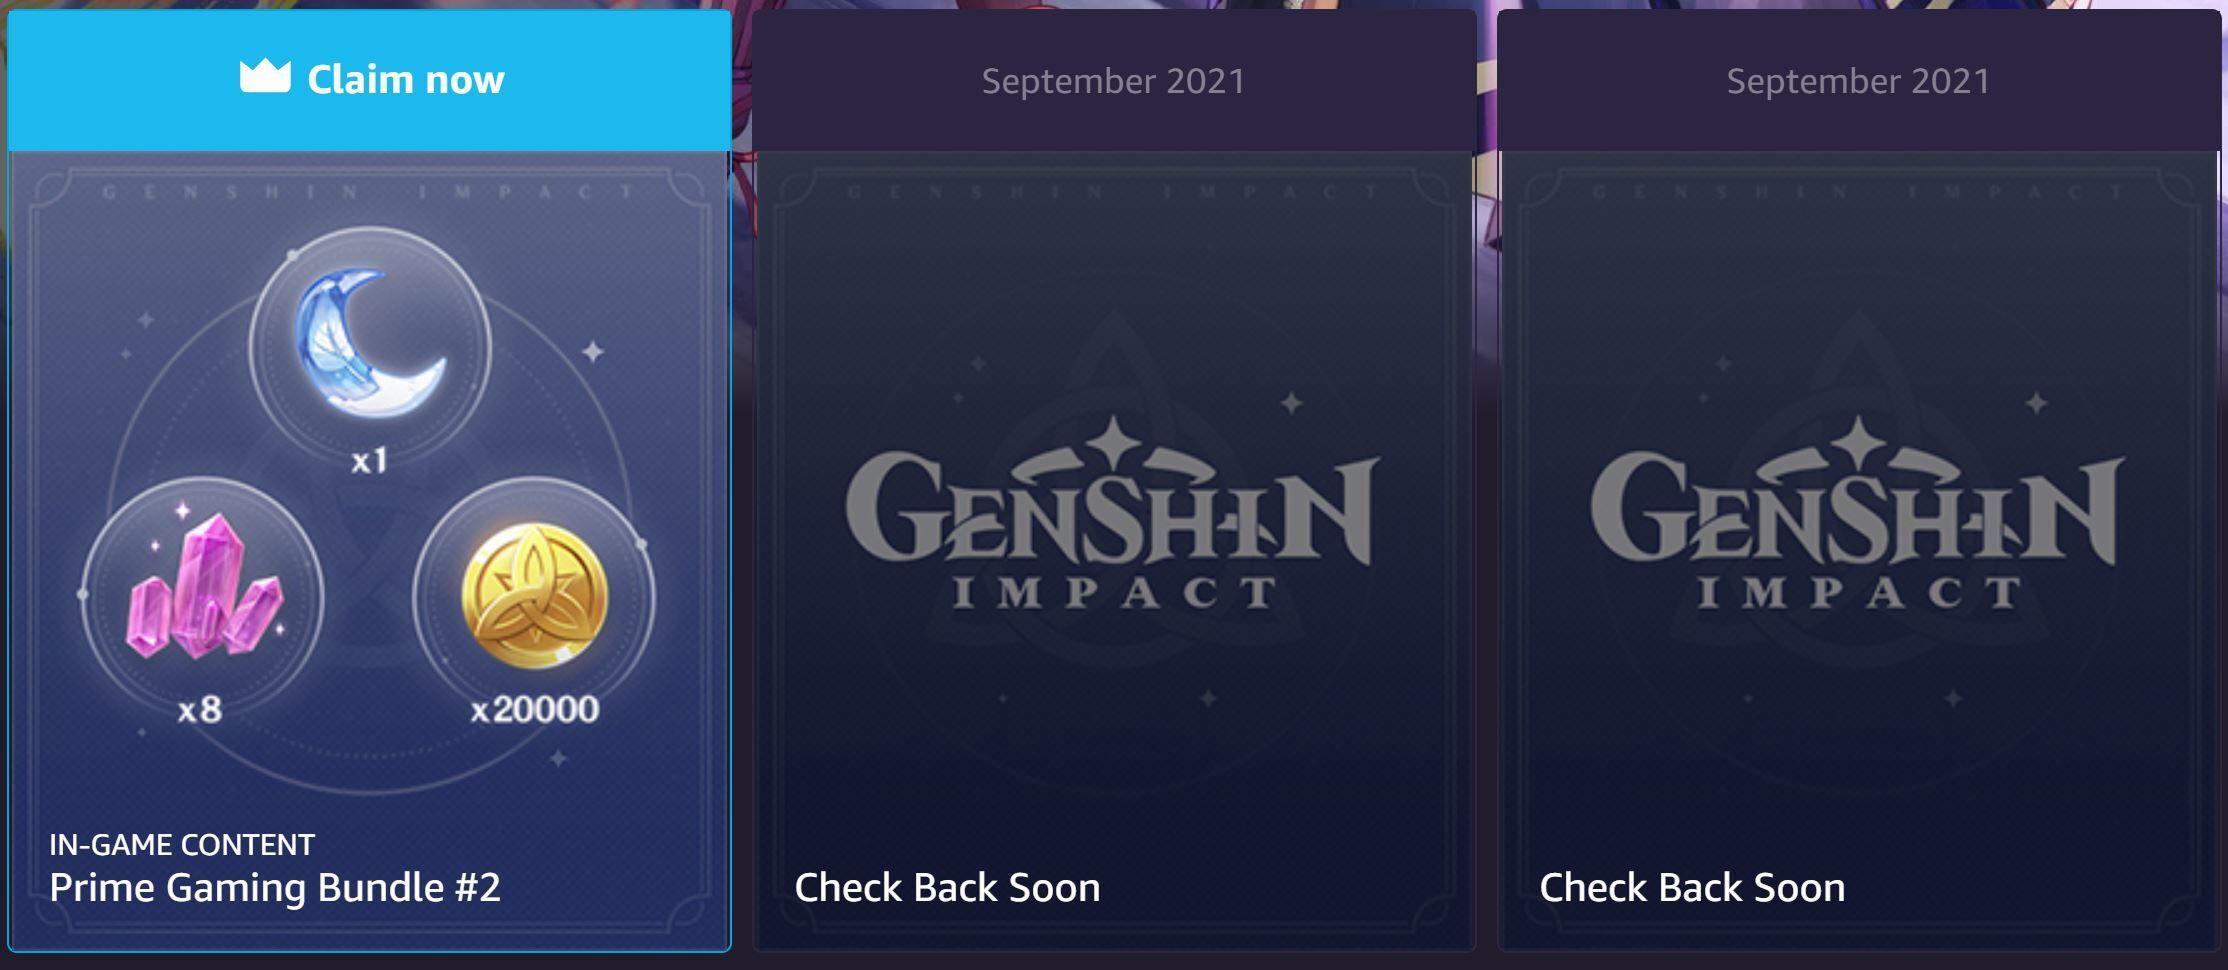 August Prime Gaming offerings include in-game items for Genshin Impact